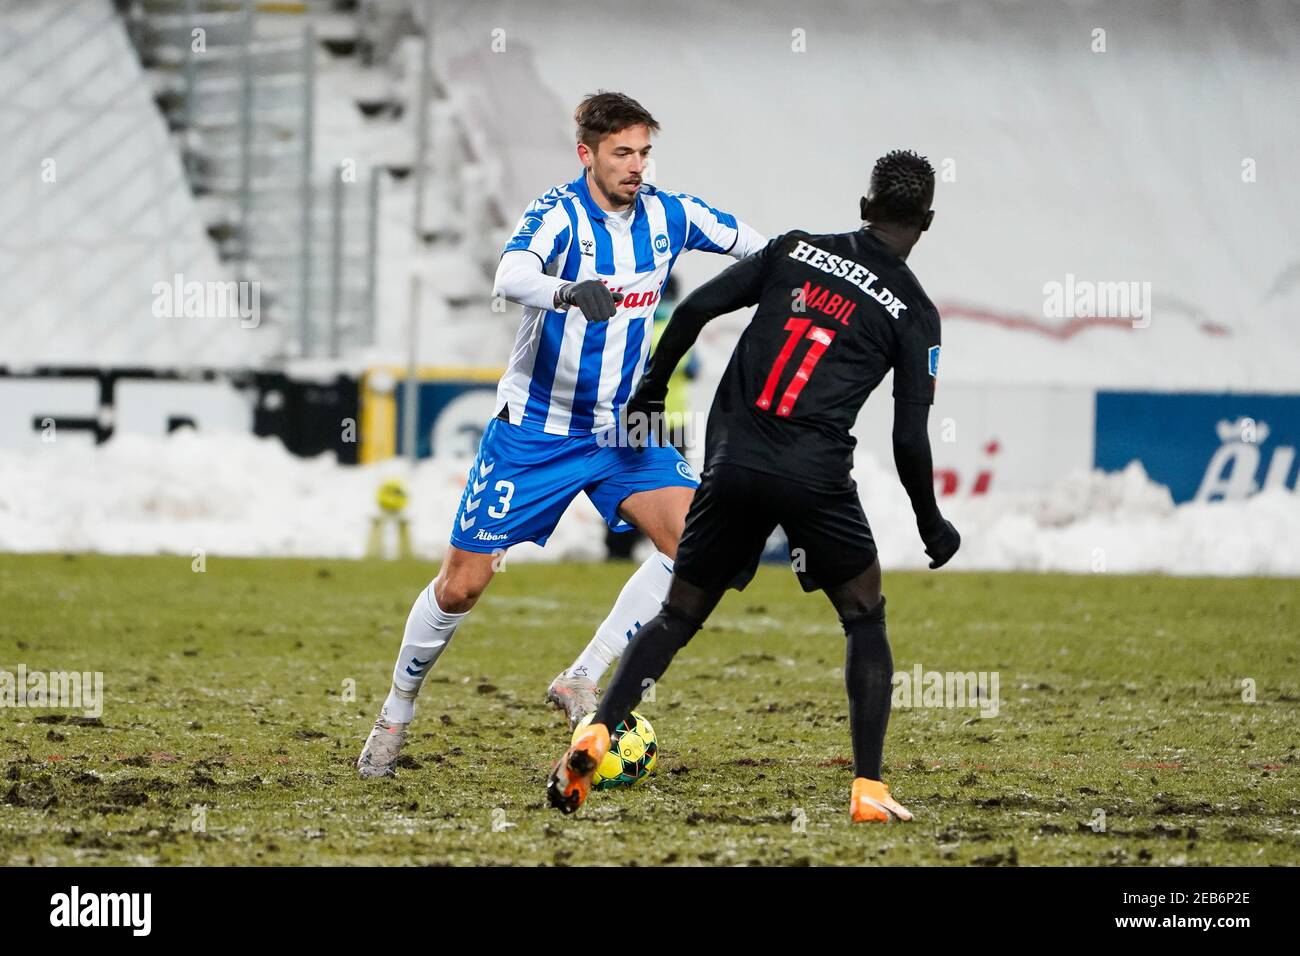 Denmark. 11th Feb, 2021. Alexander Andersen (3) of Odense Boldklub seen during the Danish Sydbank Cup match between Odense Boldklub and FC Midtjylland at Nature Energy Park in Odense. (Photo